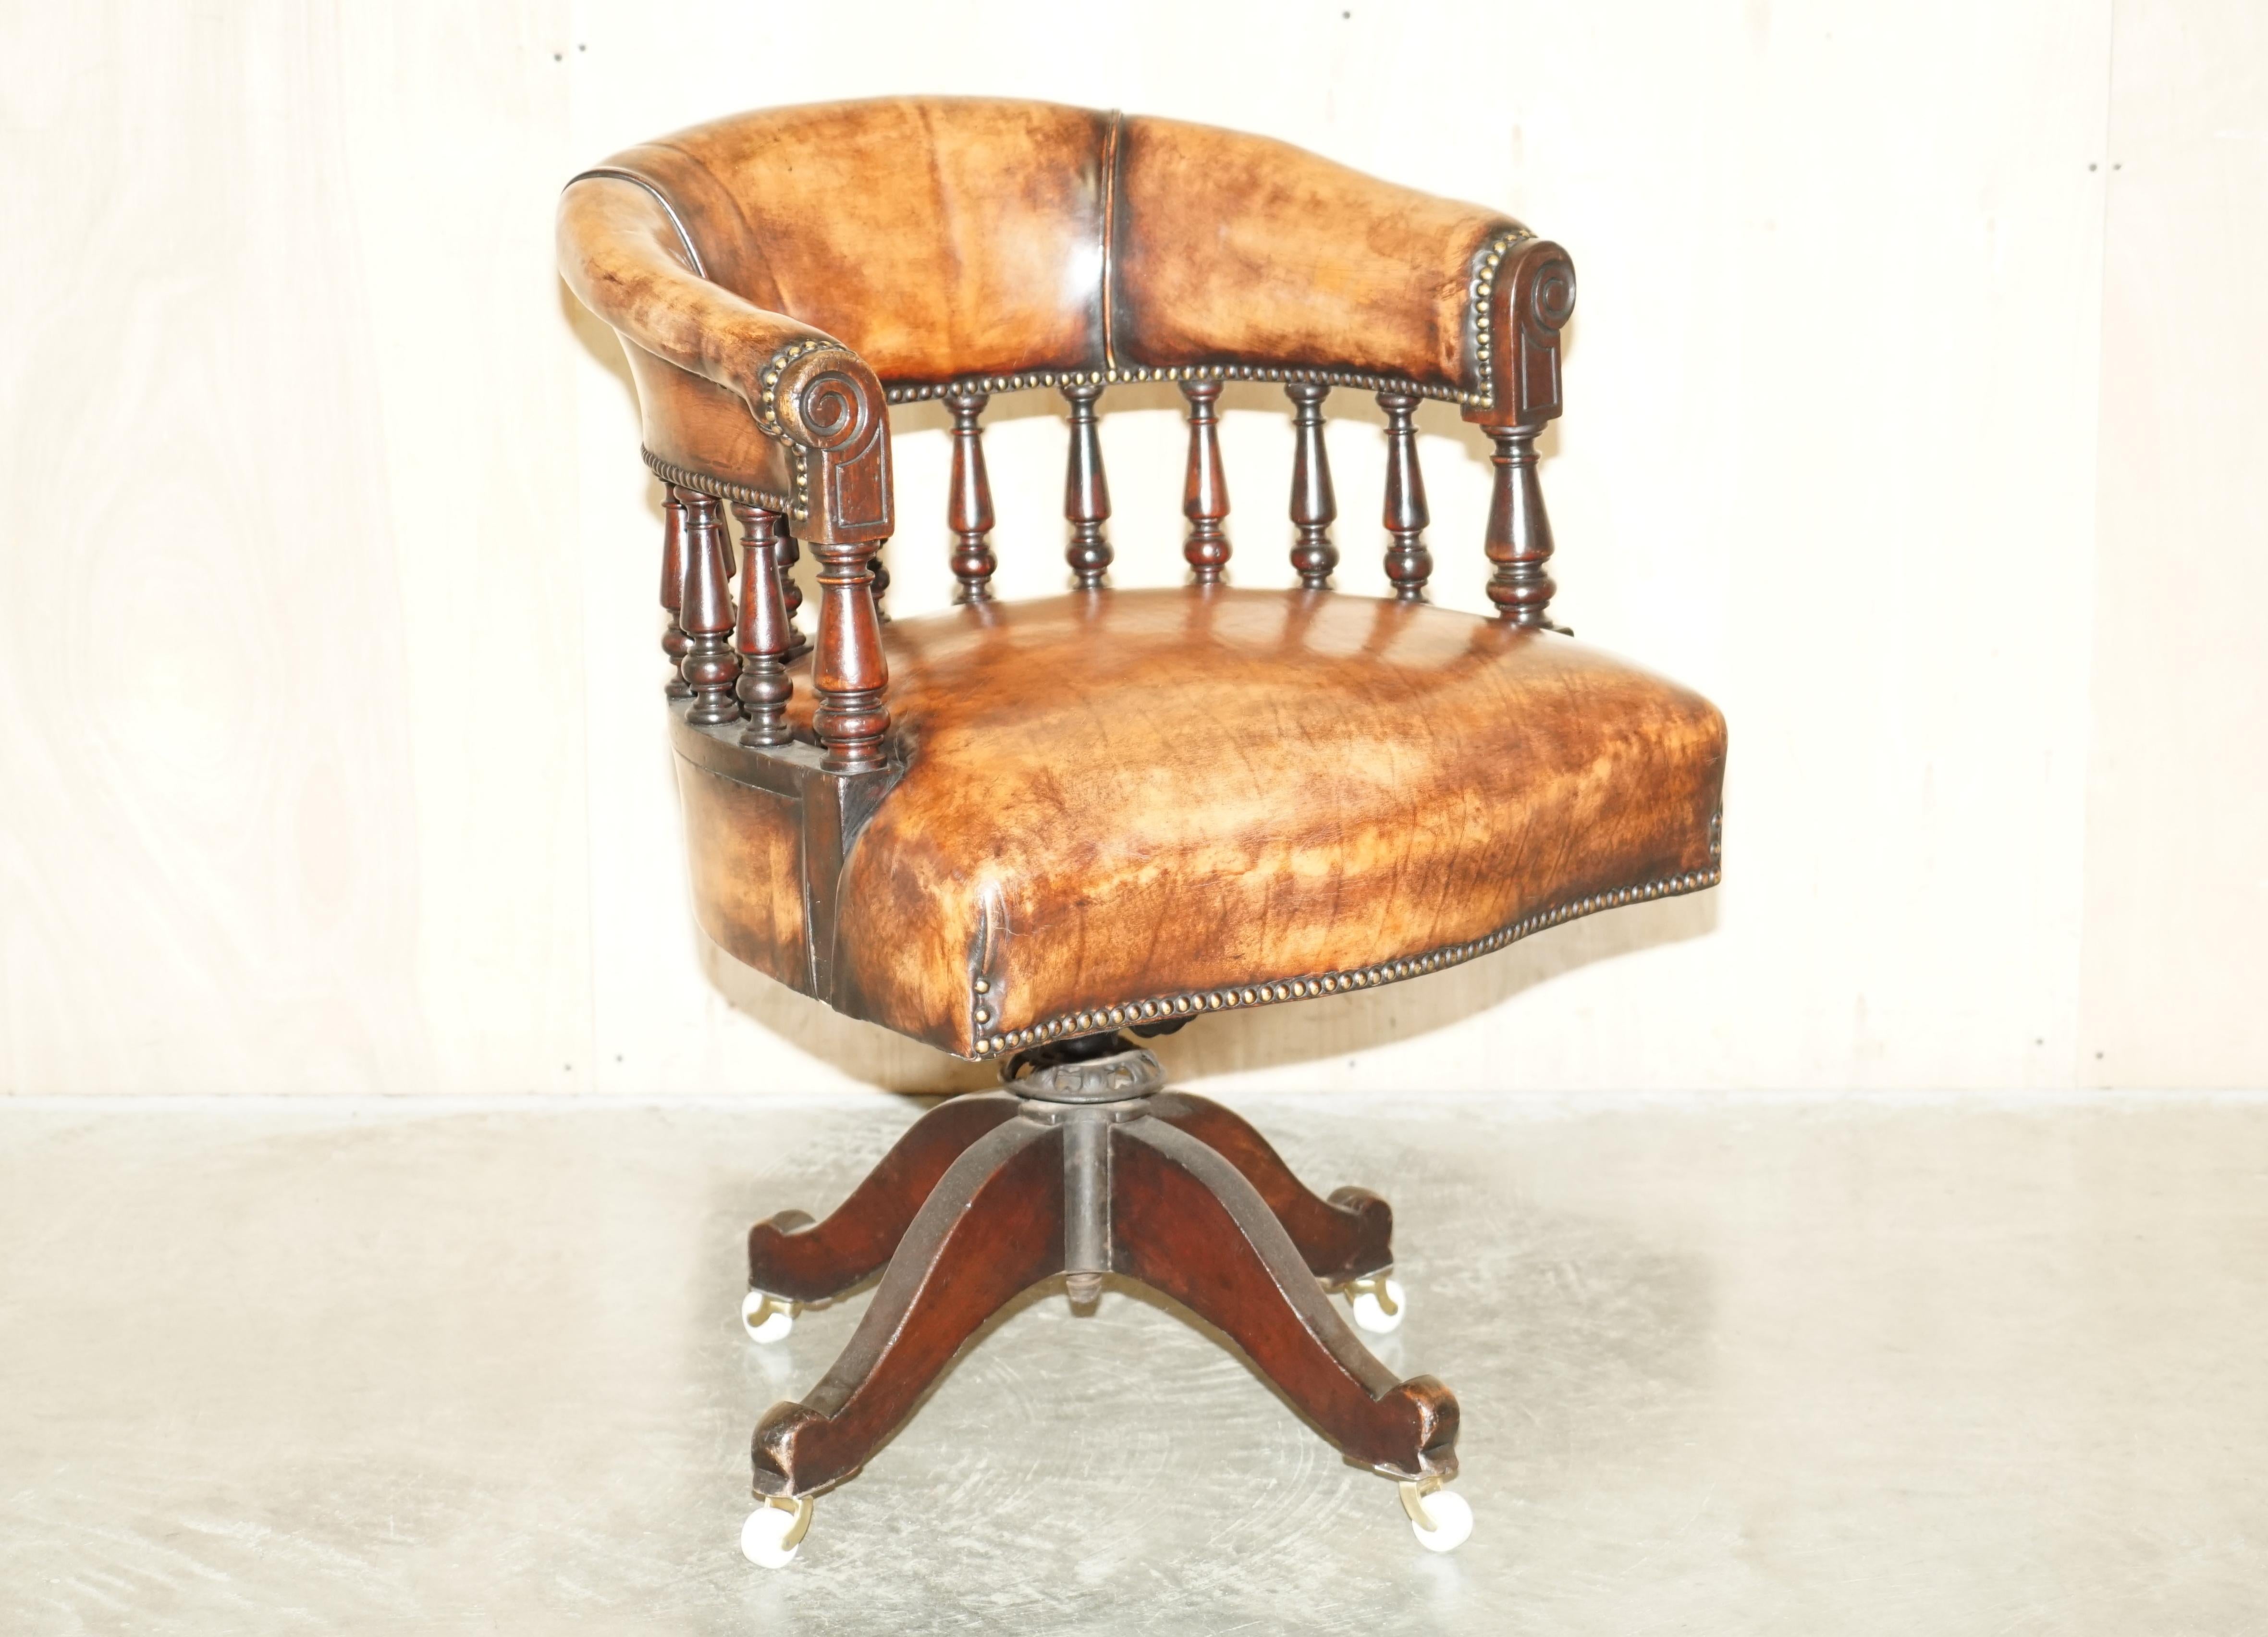 Royal House Antiques

Royal House Antiques is delighted to offer for sale this stunning original, fully restored circa 1830 William IV Captains chair with period Porcelain castors 

Please note the delivery fee listed is just a guide, it covers